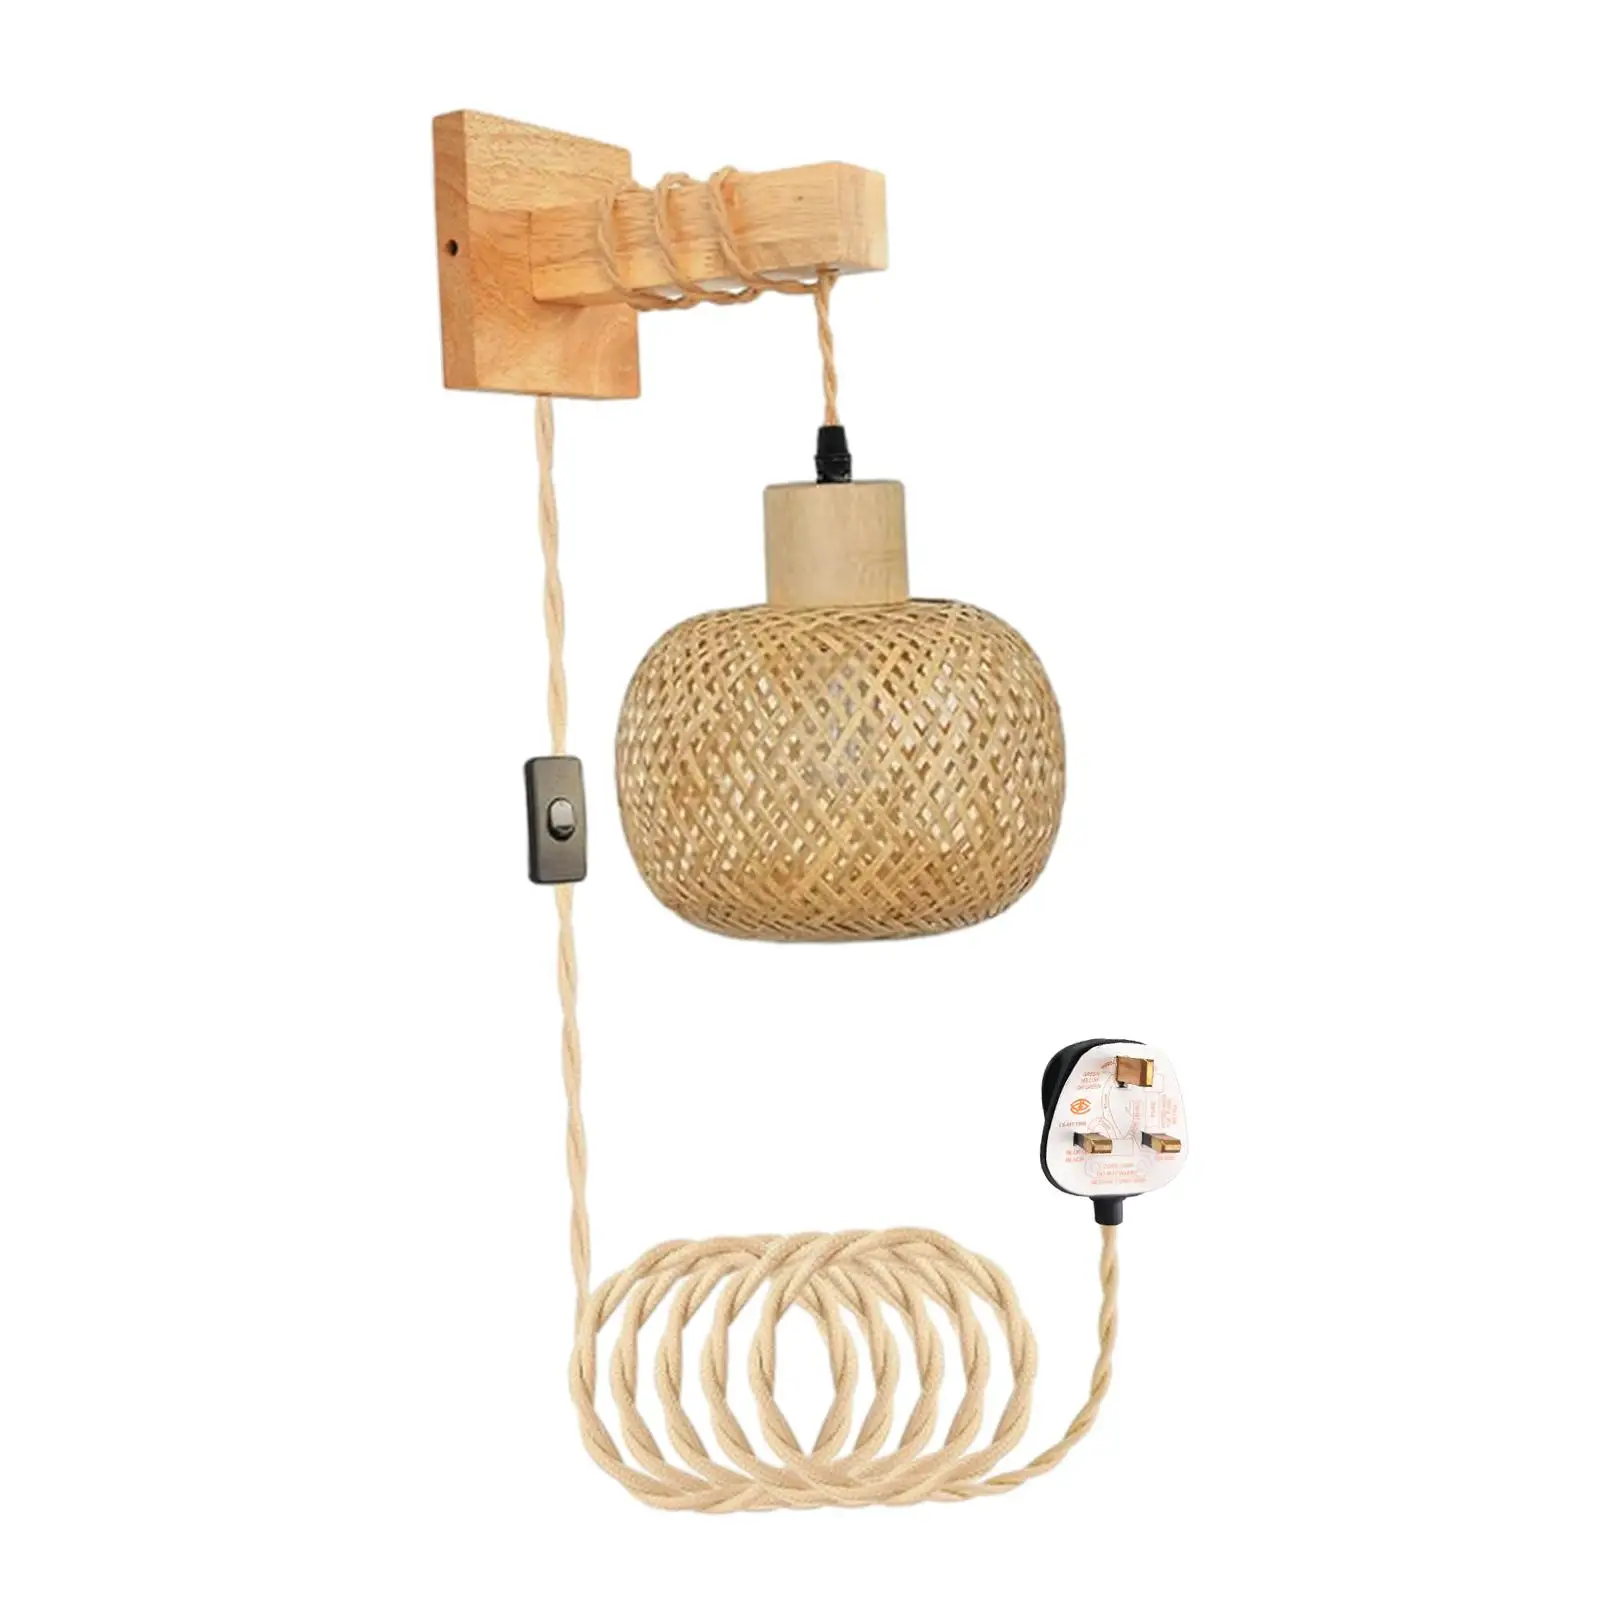 Bamboo Wall Sconce Wall Mount Sconce E26 Base Hand Woven Bathroom Vanity Wall Light for Home Stairs Bathroom Living Room Balcony